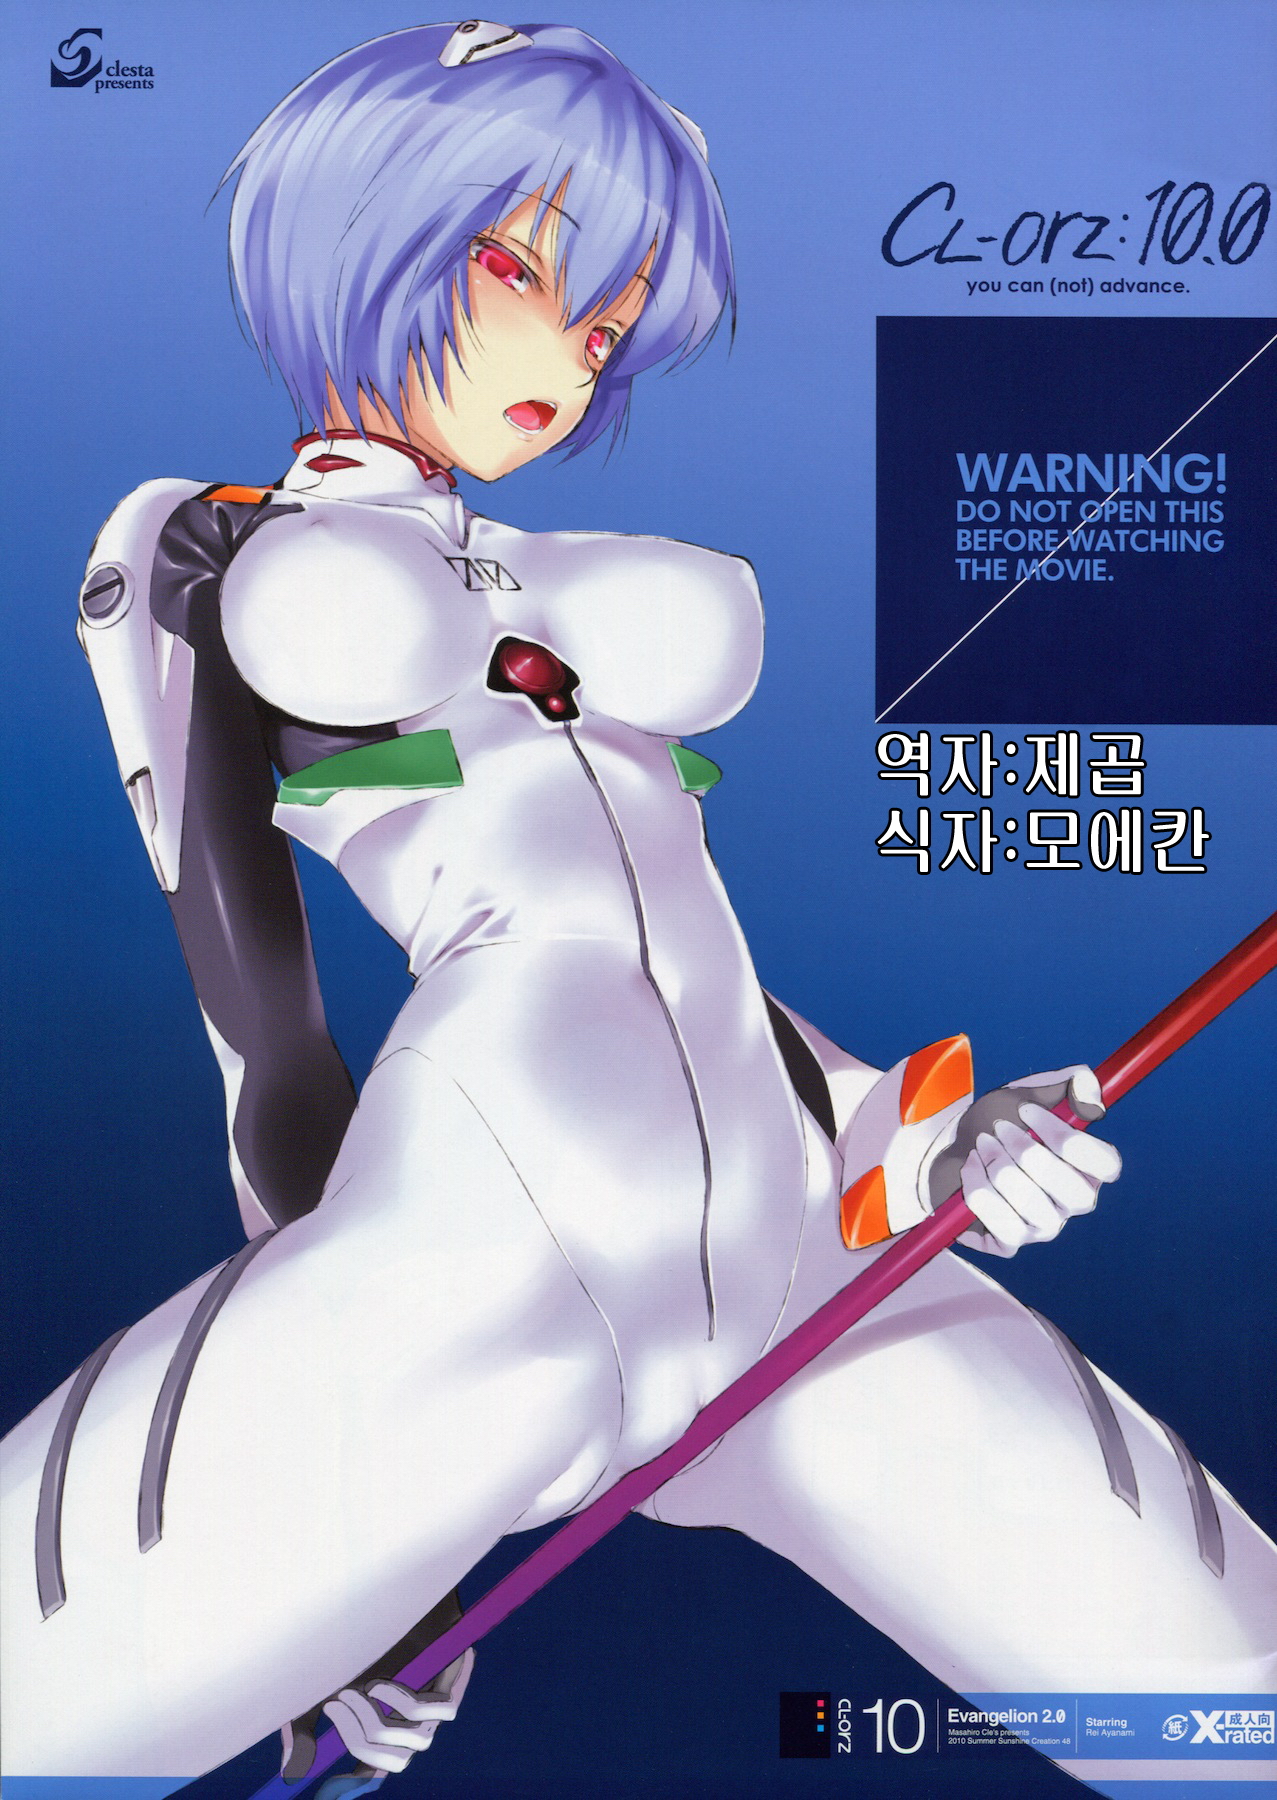 (SC48) [Clesta (Kure Masahiro)] CL-orz:10.0 you can (not) advance (Rebuild of Evangelion) [Korean] (サンクリ48) [クレスタ (呉マサヒロ)] CL-orz 10.0 you can (not) advance (ヱヴァンゲリヲン新劇場版) [韓国翻訳]